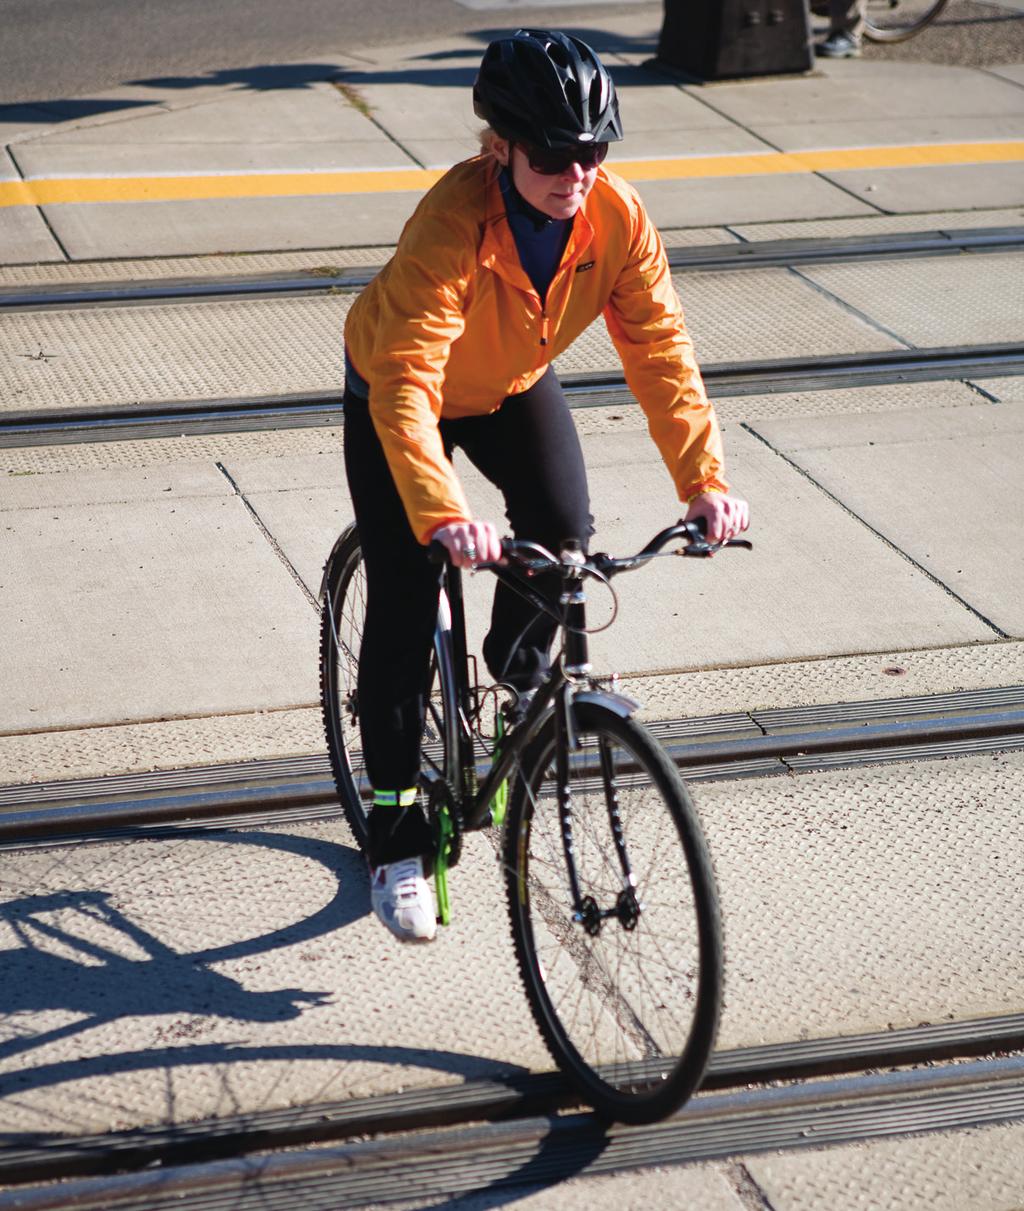 Cross train tracks, sewer grates and other obstructions at a right angle and transition your weight toward the back of the bicycle to prevent getting your wheel caught.